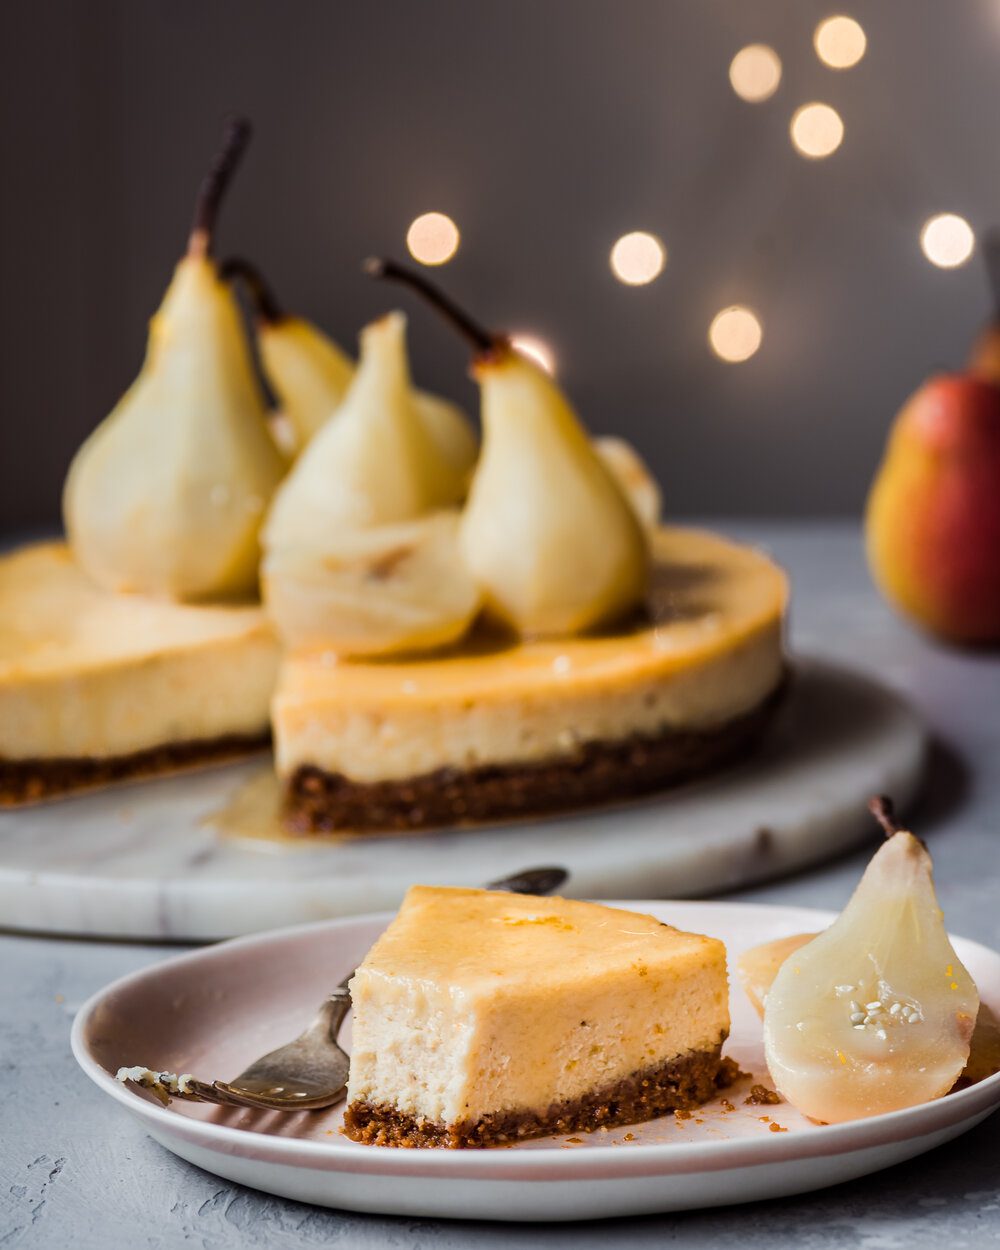 Ginger-Orange Baked Vegan Cheesecake with Poached Pears